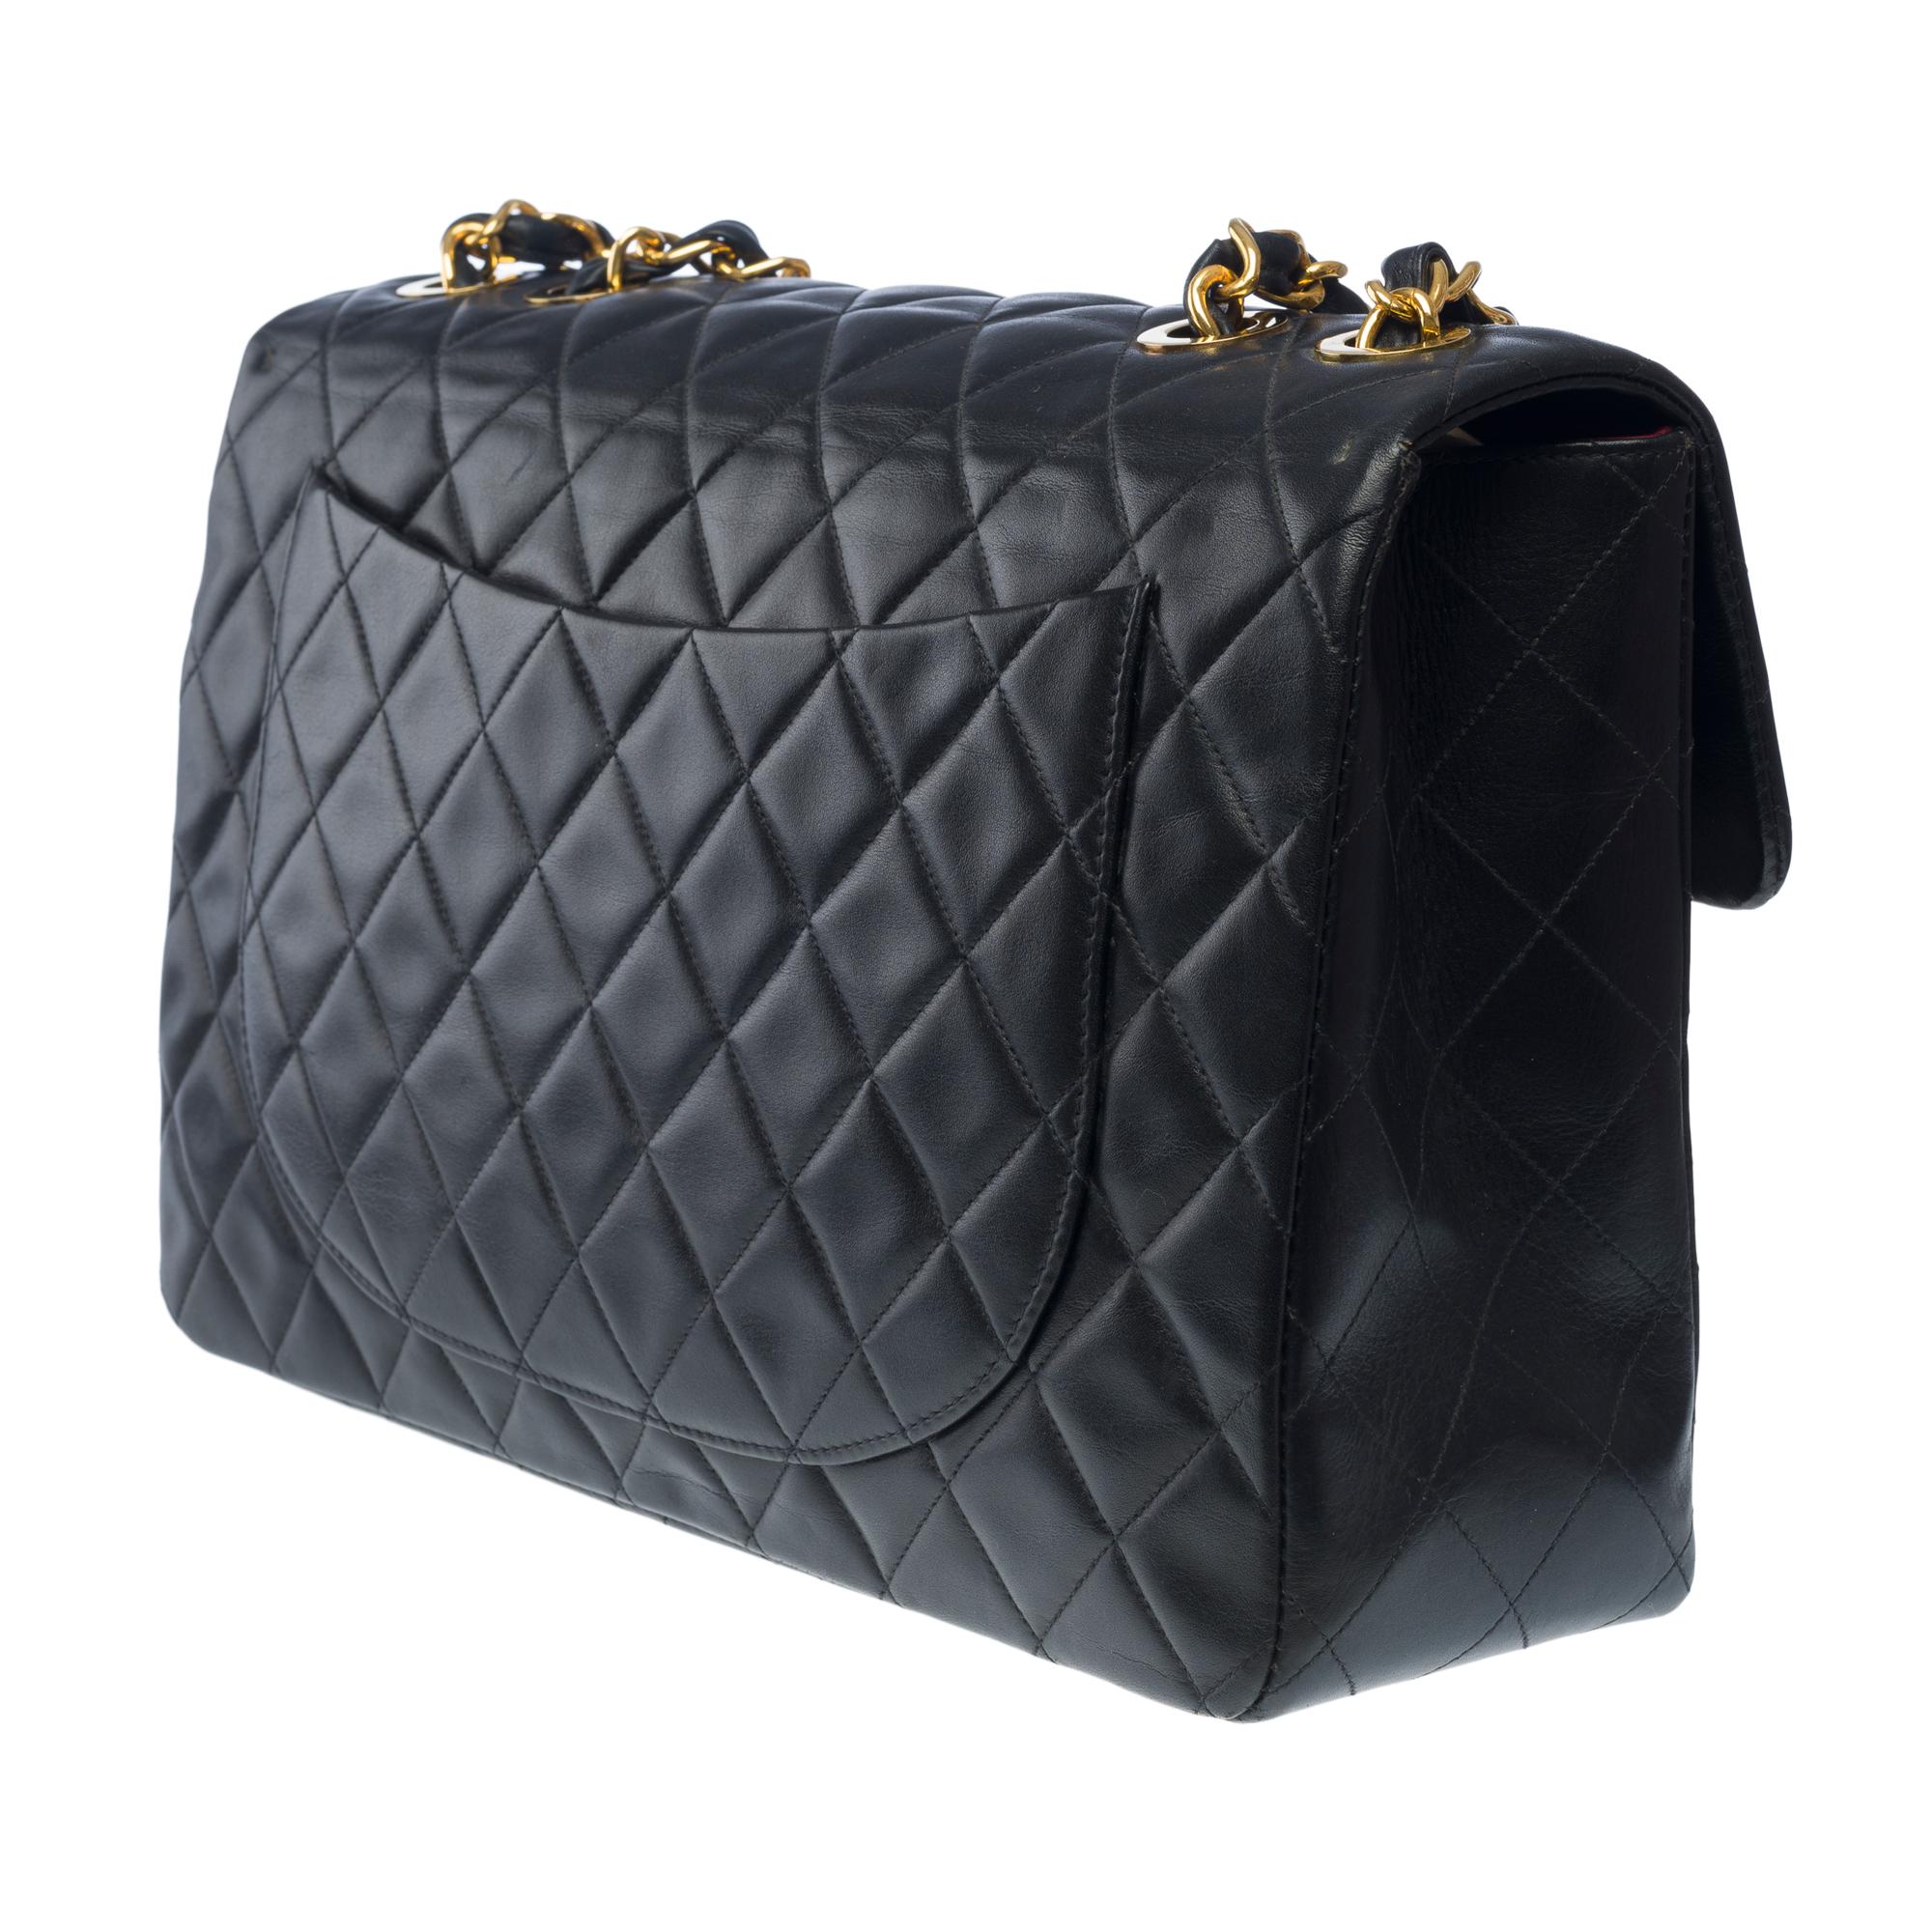 Women's Chanel Timeless Maxi Jumbo flap shoulder bag in black quilted lambskin, GHW For Sale